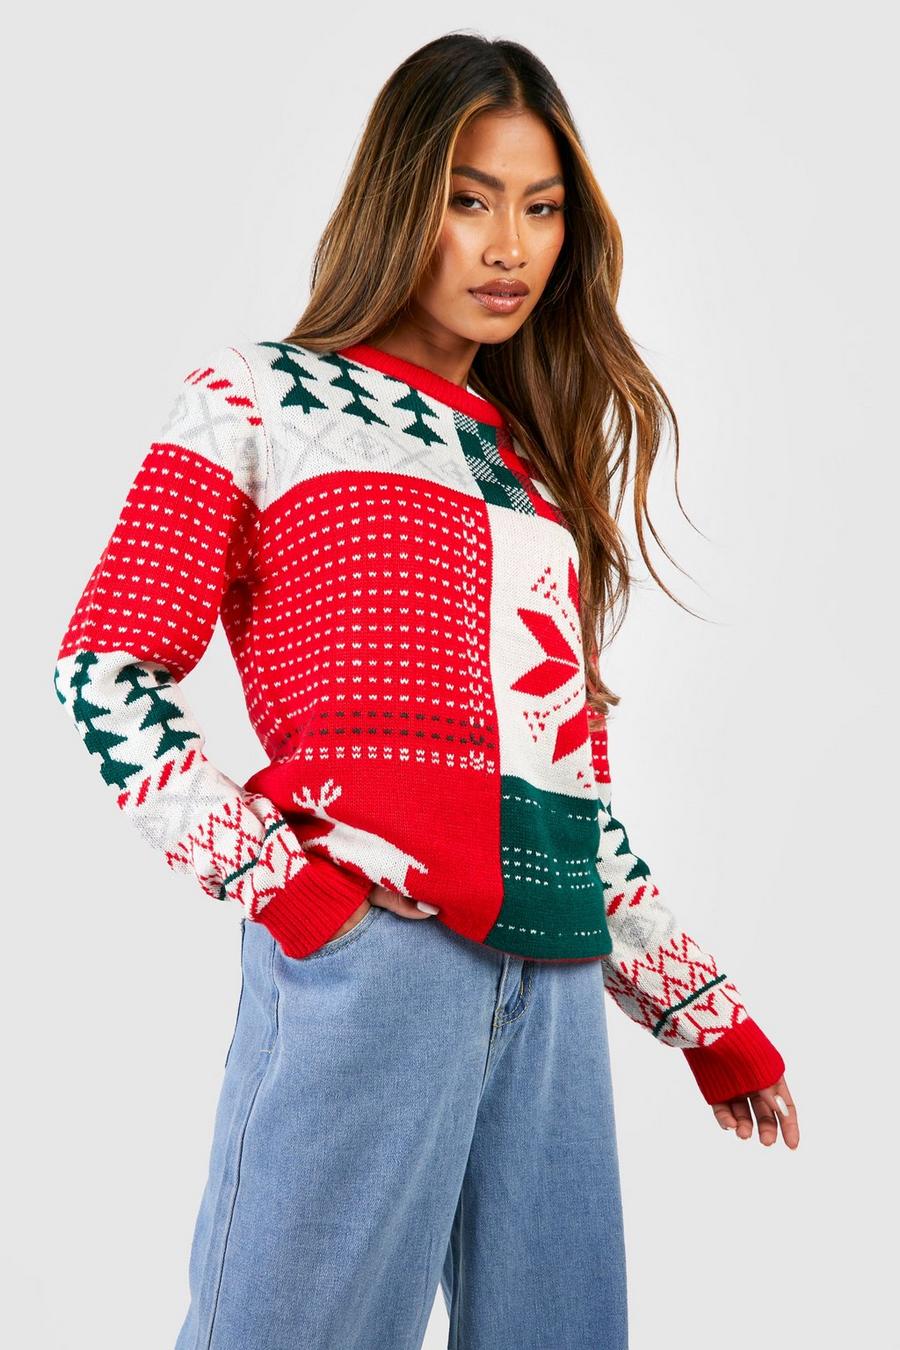 Red Vintage Patchwork Retro Christmas Sweater